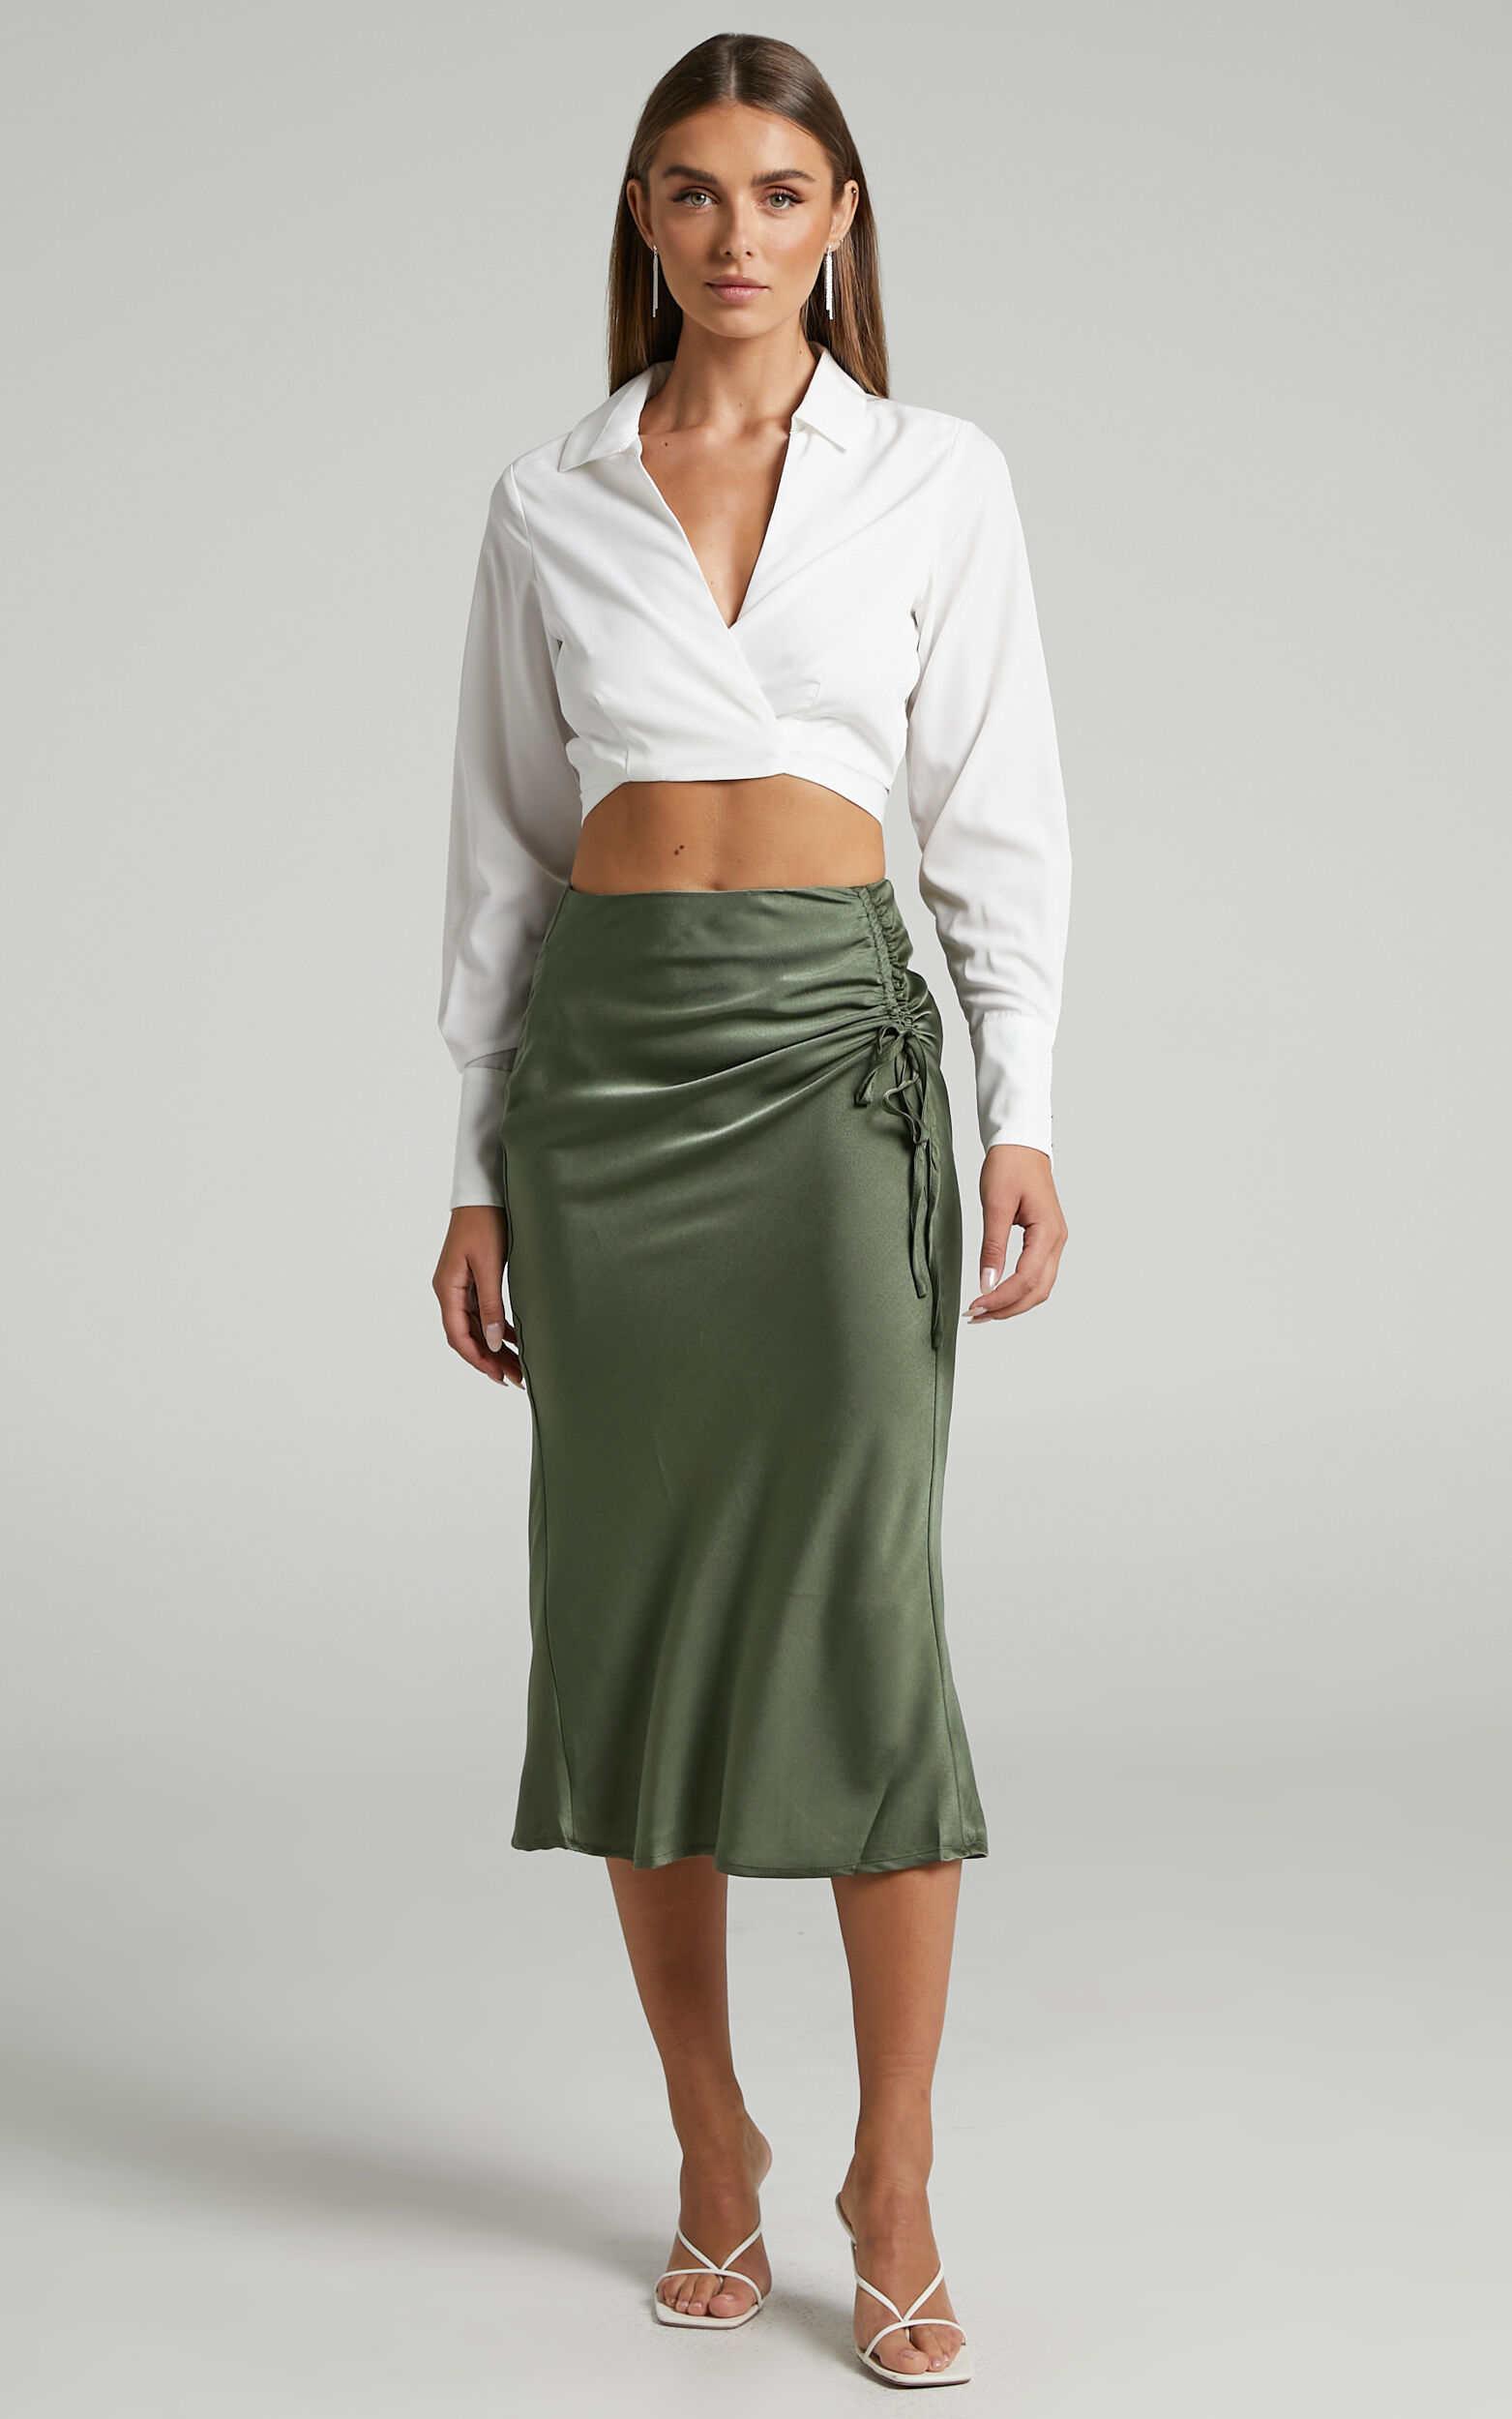 Zaylin Midaxi Skirt - Ruched Side Satin Slip Skirt in Olive - 04, GRN2